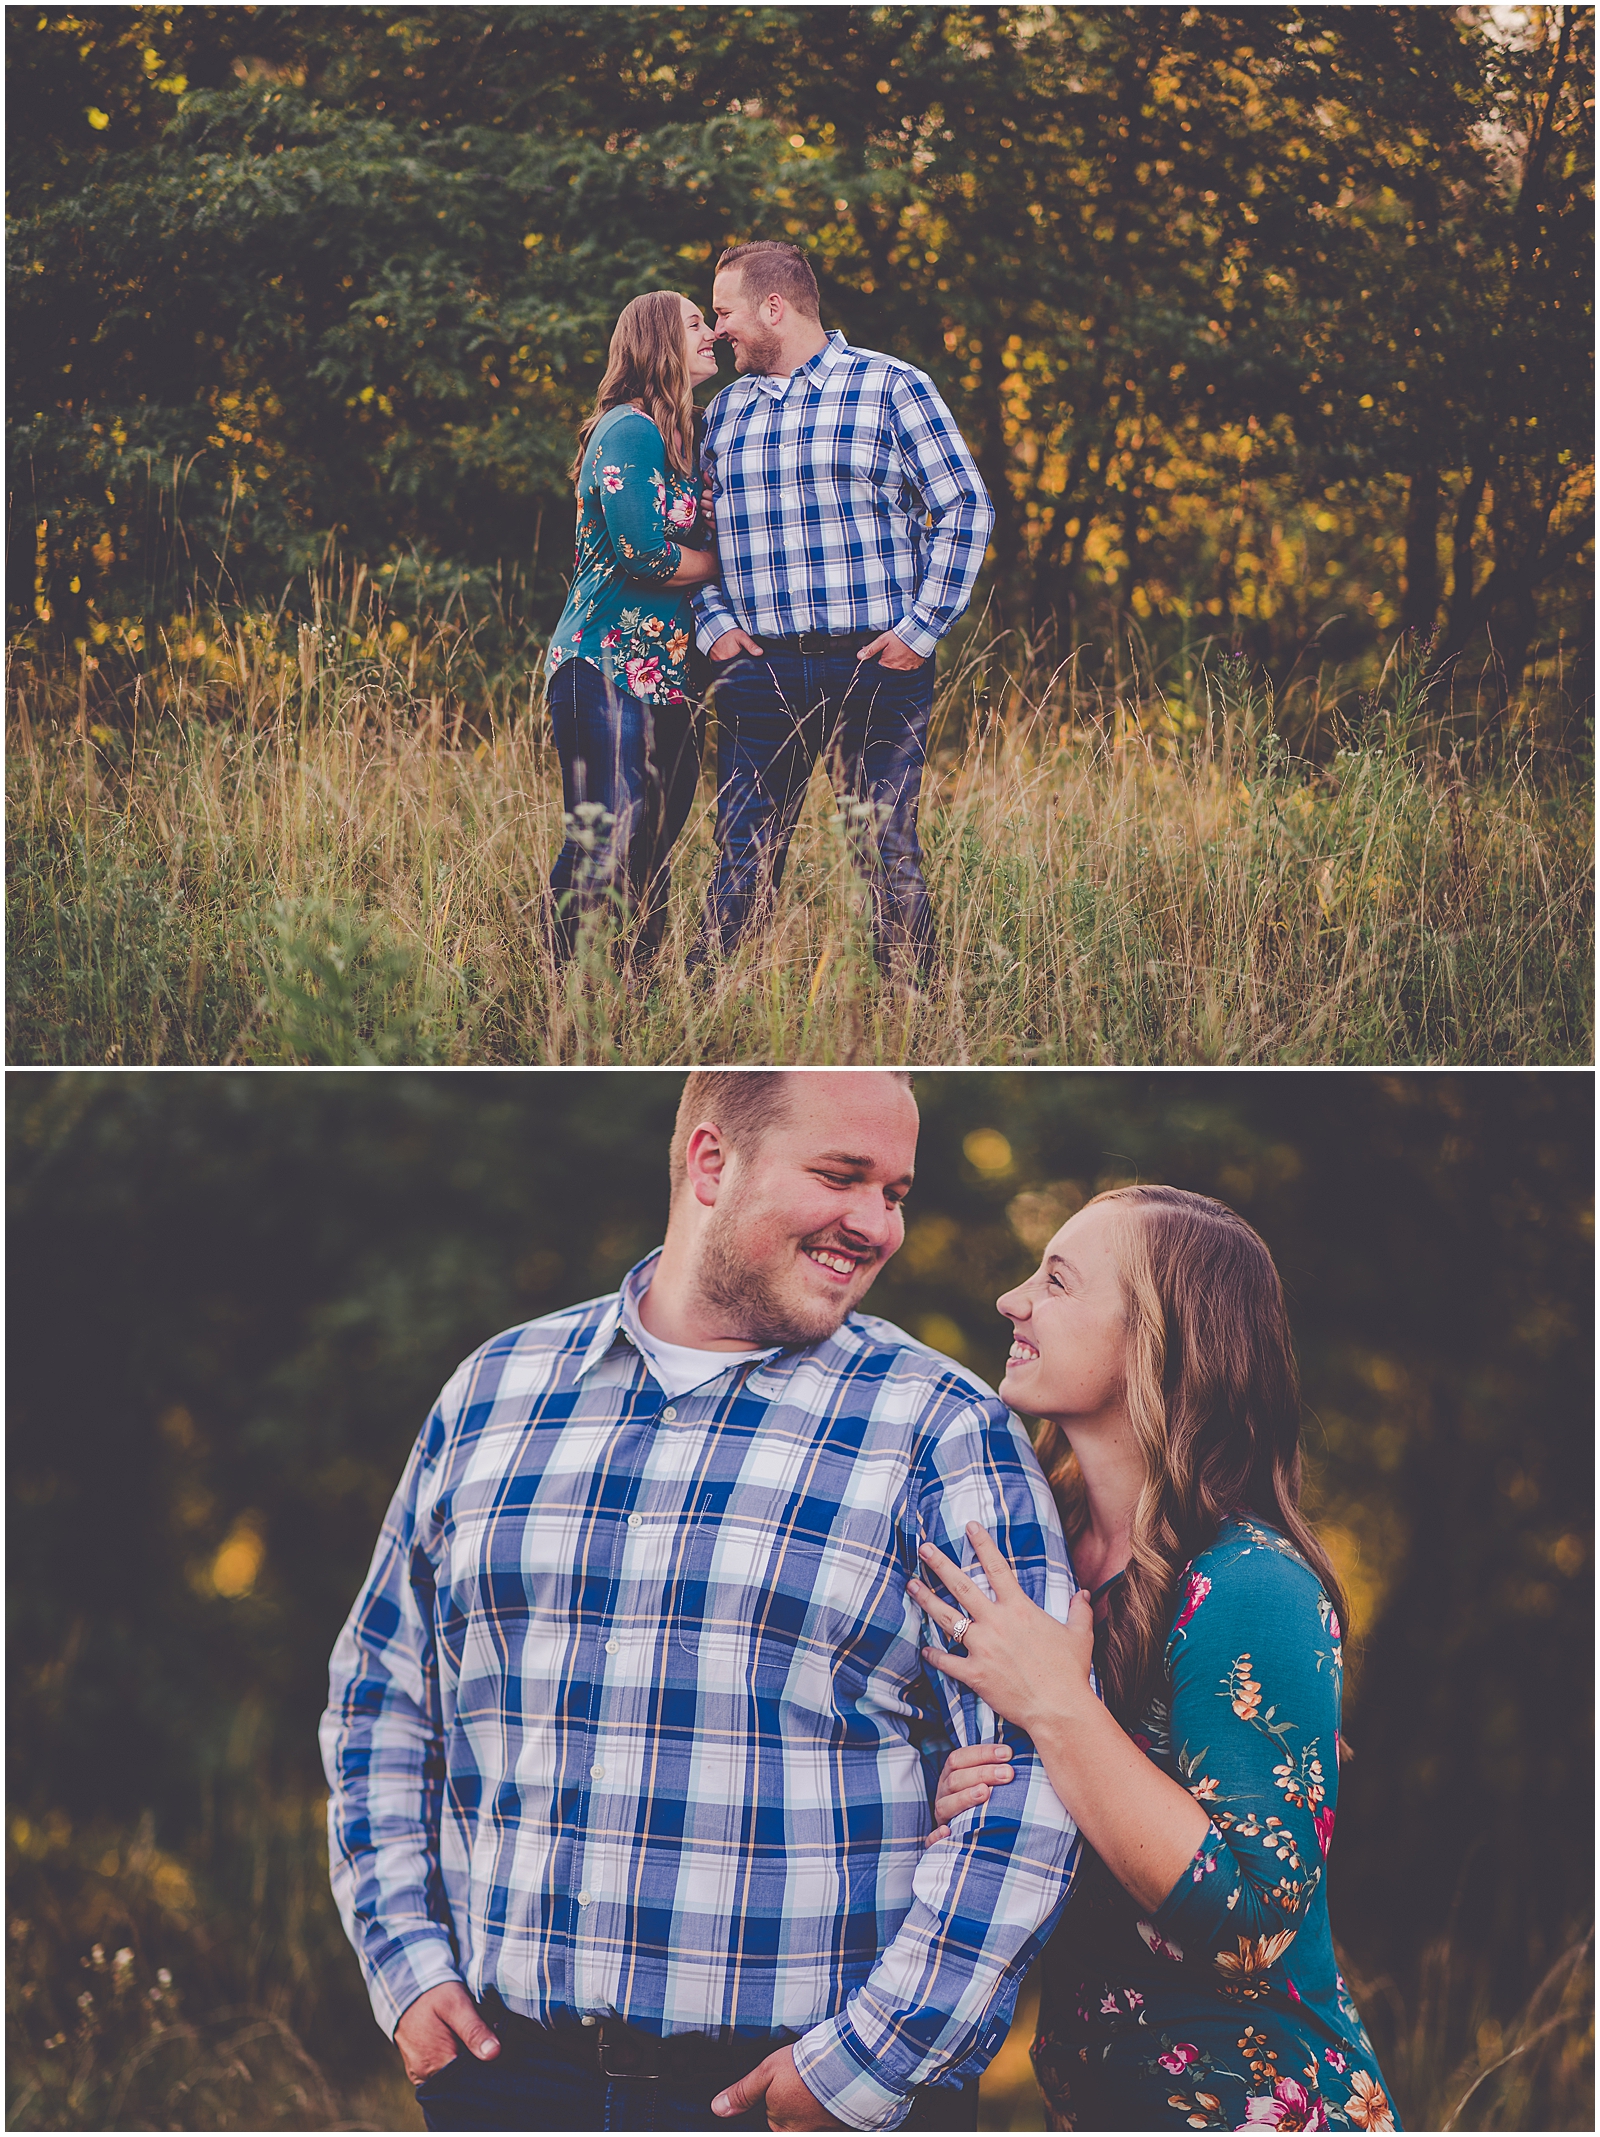 Mackenzie and Greg's Iroquois County farm anniversary session in Cissna Park, Illinois with Chicagoland wedding photographer Kara Evans Photographer.